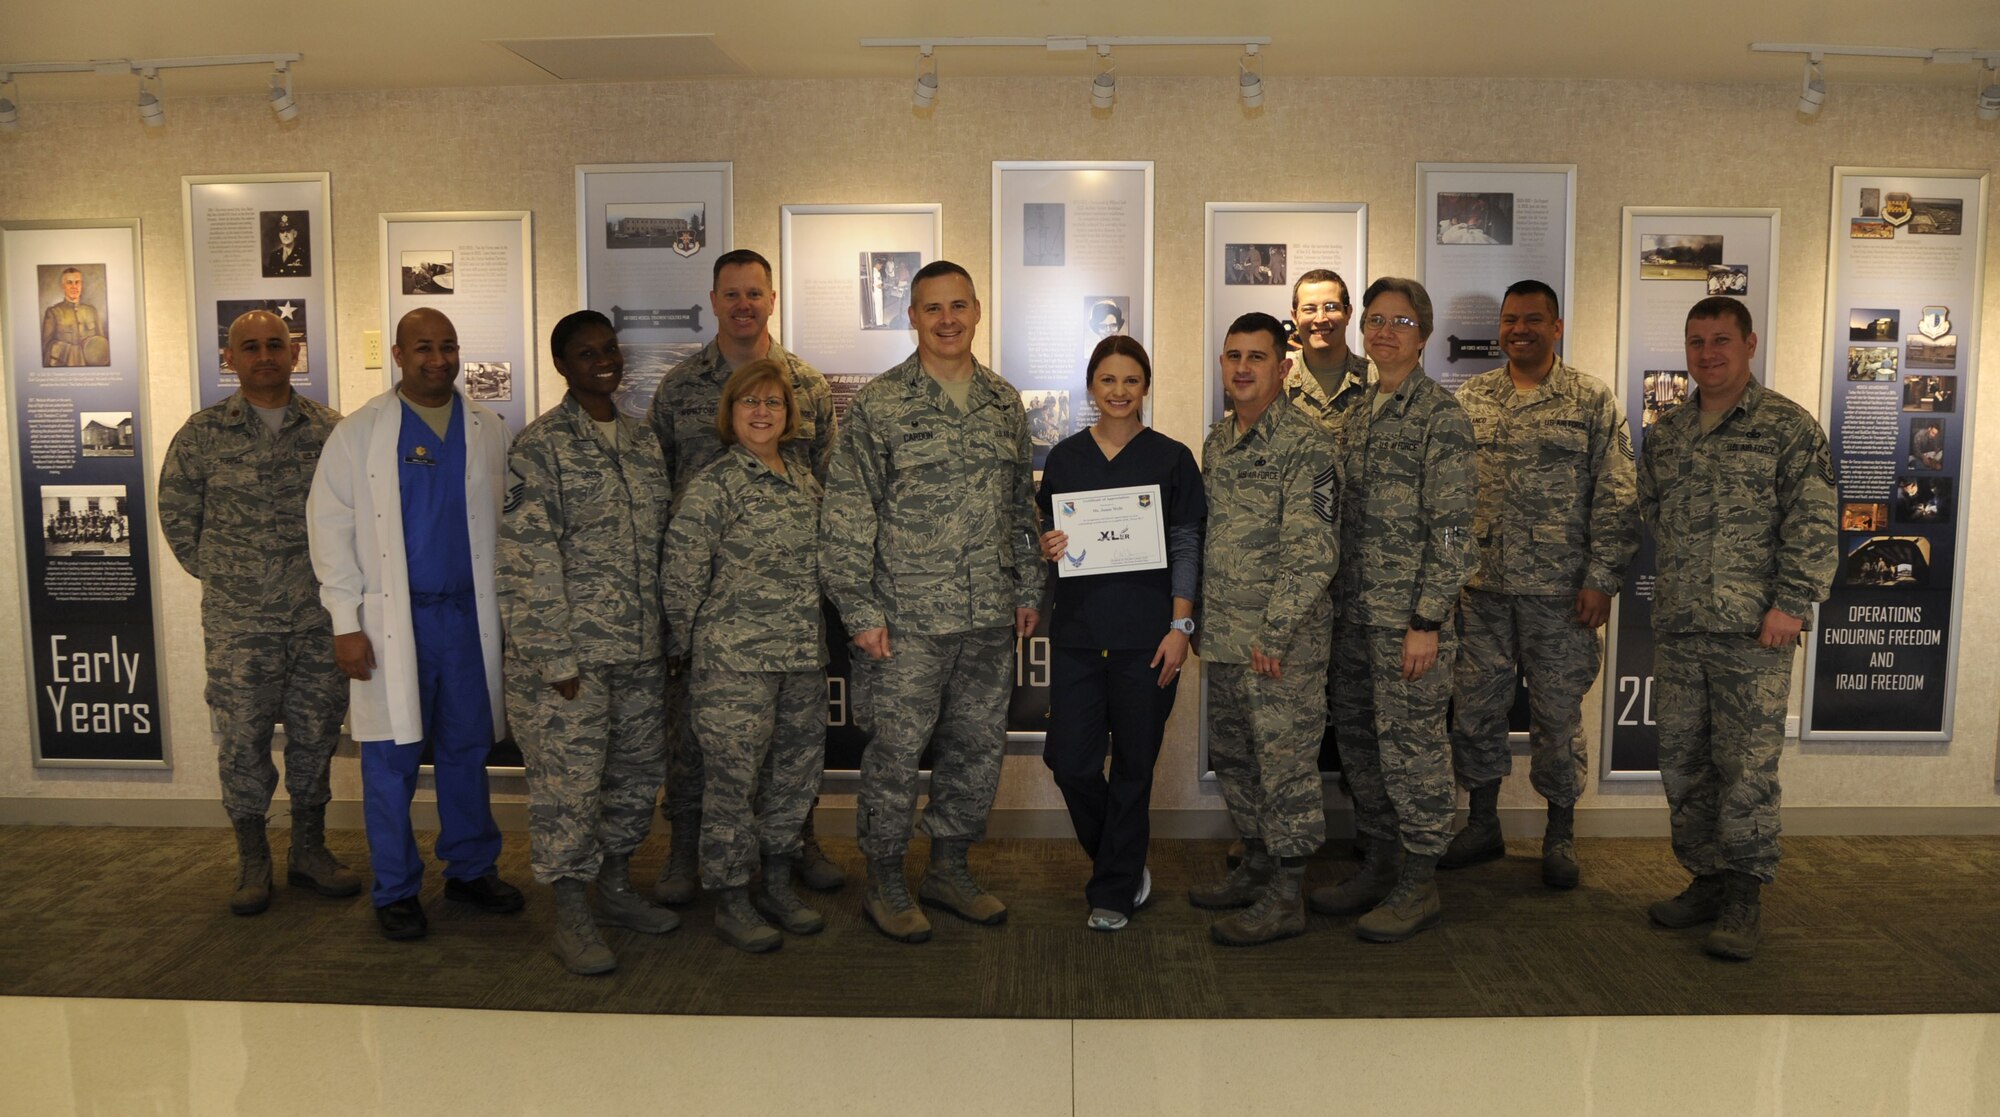 Jamie Wells, 47th Medical Group pediatric nurse, was chosen by wing leadership to be the “XLer” of the week, for the week of Jan. 8, 2018. The “XLer” award, presented by Col. Thatcher Cardon, 47th Medical Group commander, is given to those who consistently make outstanding contributions to their unit and the Laughlin mission.